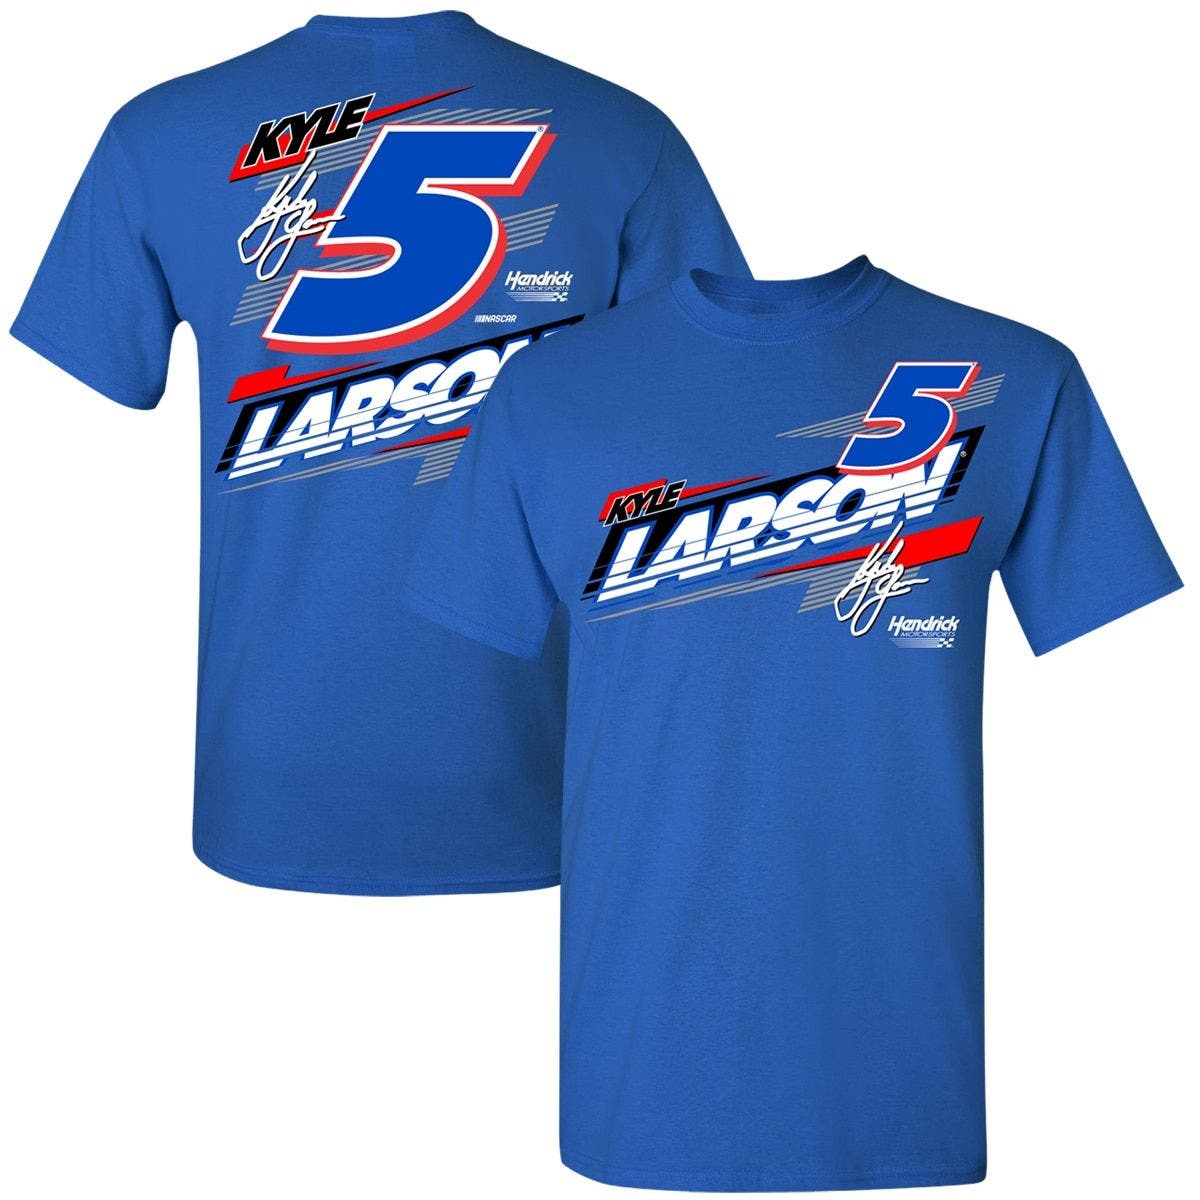 HENDRICK MOTORSPORTS TEAM COLLECTION Men's Hendrick Motorsports Team Collection Royal Kyle Larson Xtreme T-Shirt at Nordstrom